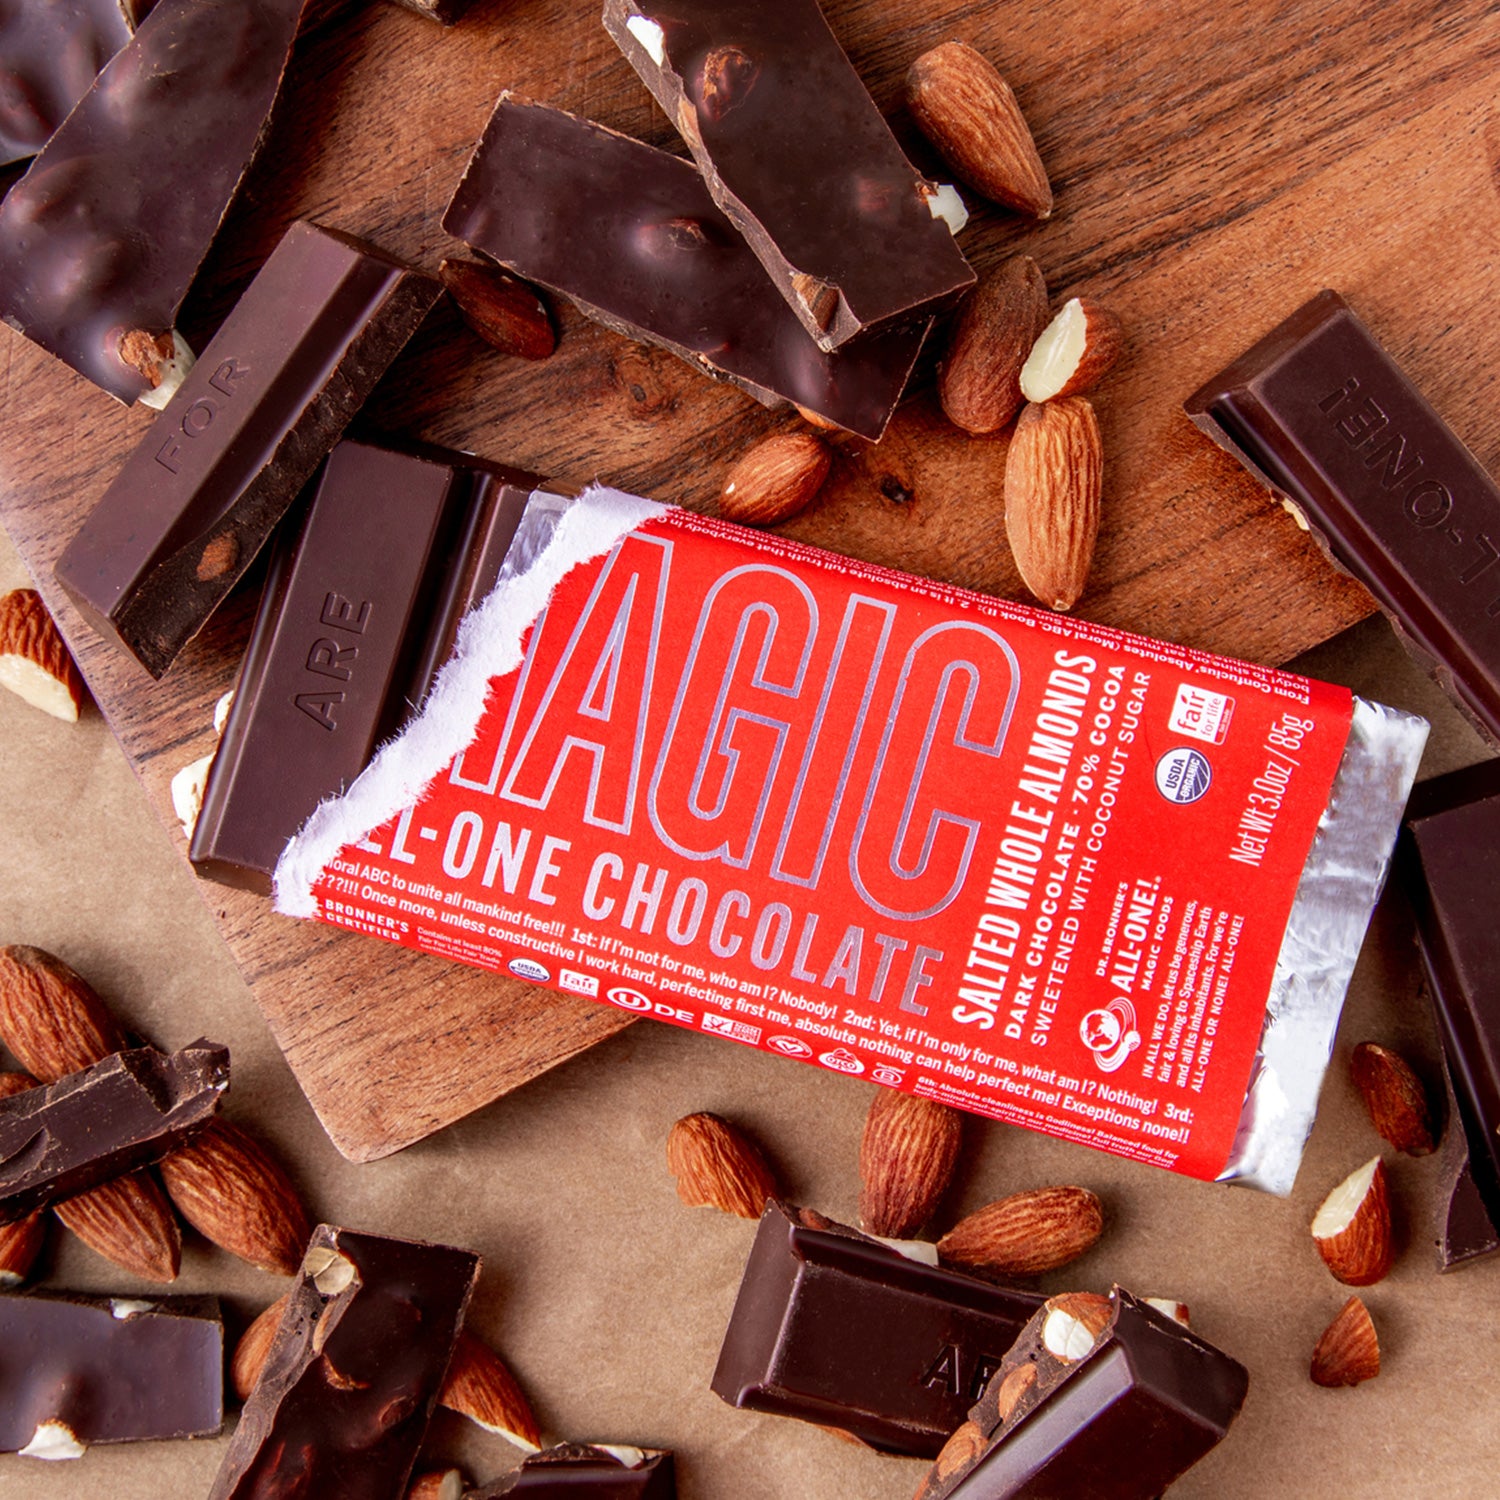 Dr. Bronner's Magic All-One Chocolate - Salted Whole Almonds